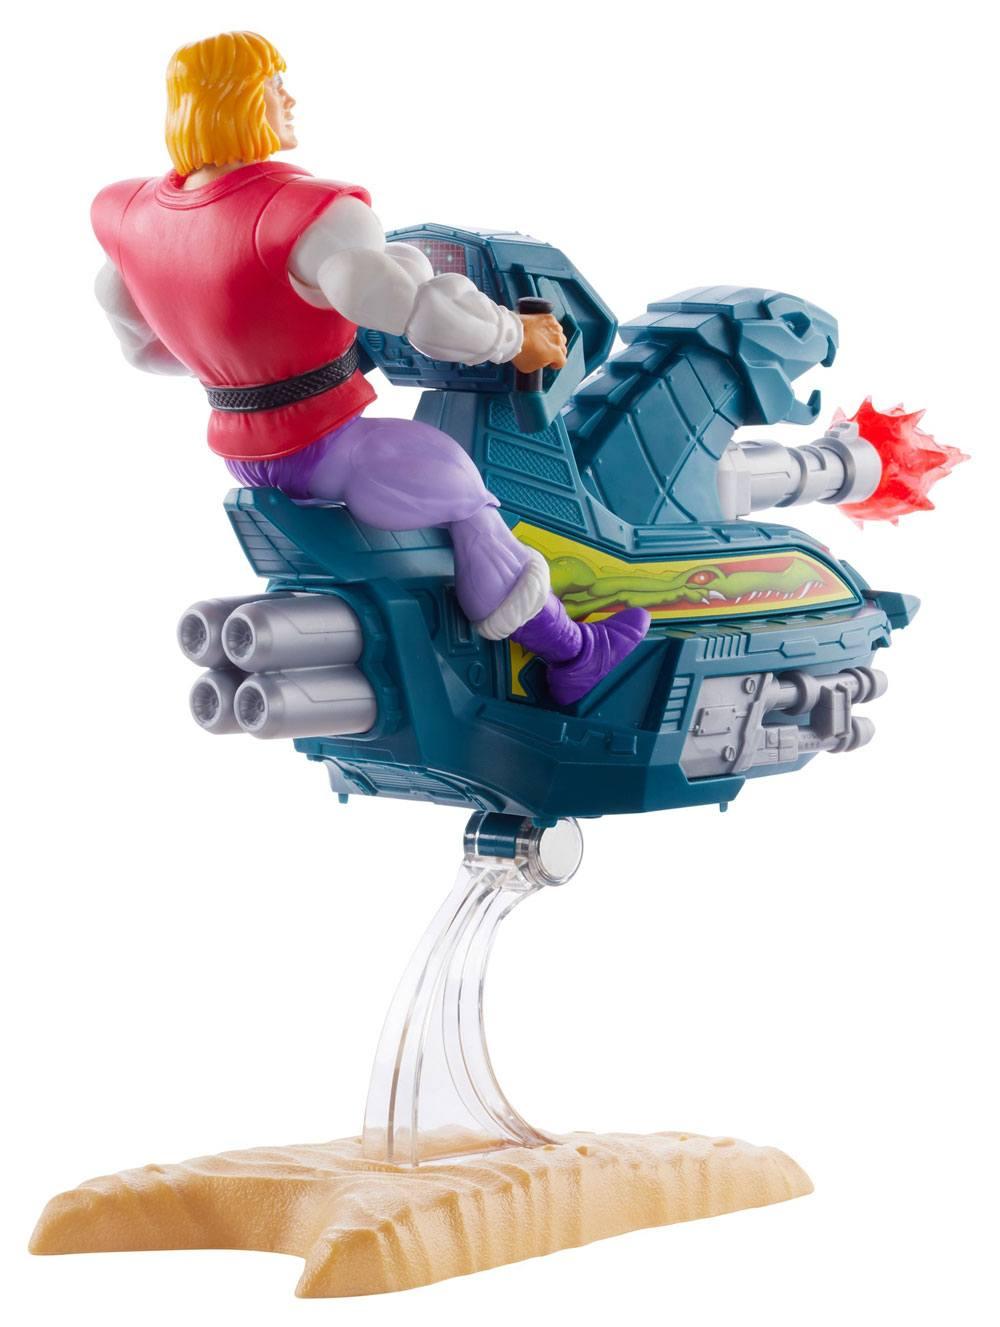 Masters of the universe origins 2020 figurine prince adam with sky sled 14 cm 5 